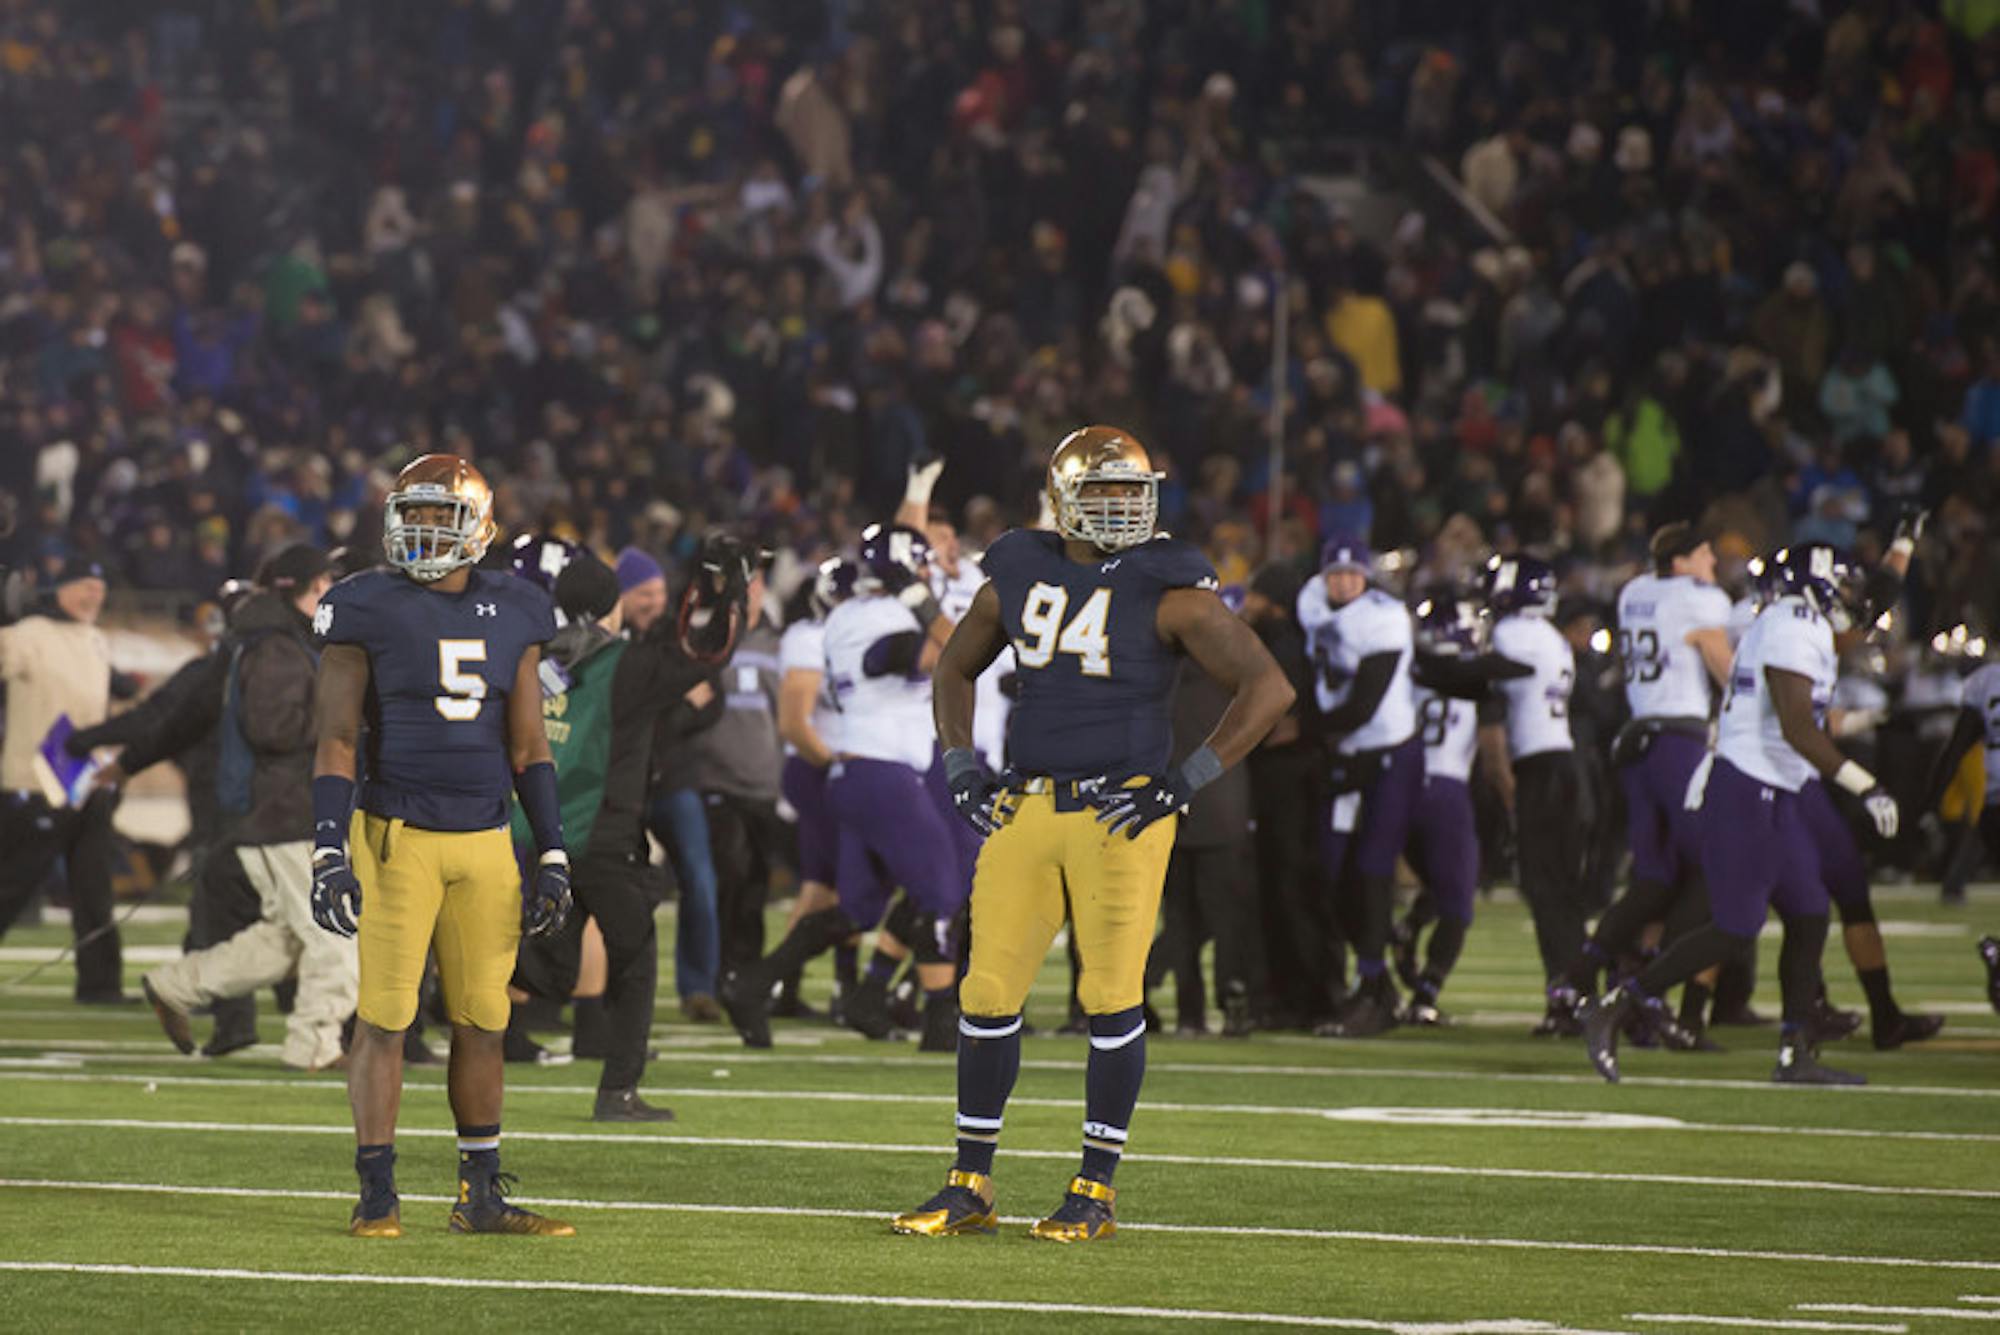 Irish freshman linebacker Nyles Morgan, left, and junior defensive lineman Jarron Jones stand on the field while Northwestern celebrates its 43-40 overtime victory over Notre Dame on Saturday at Notre Dame Stadium.